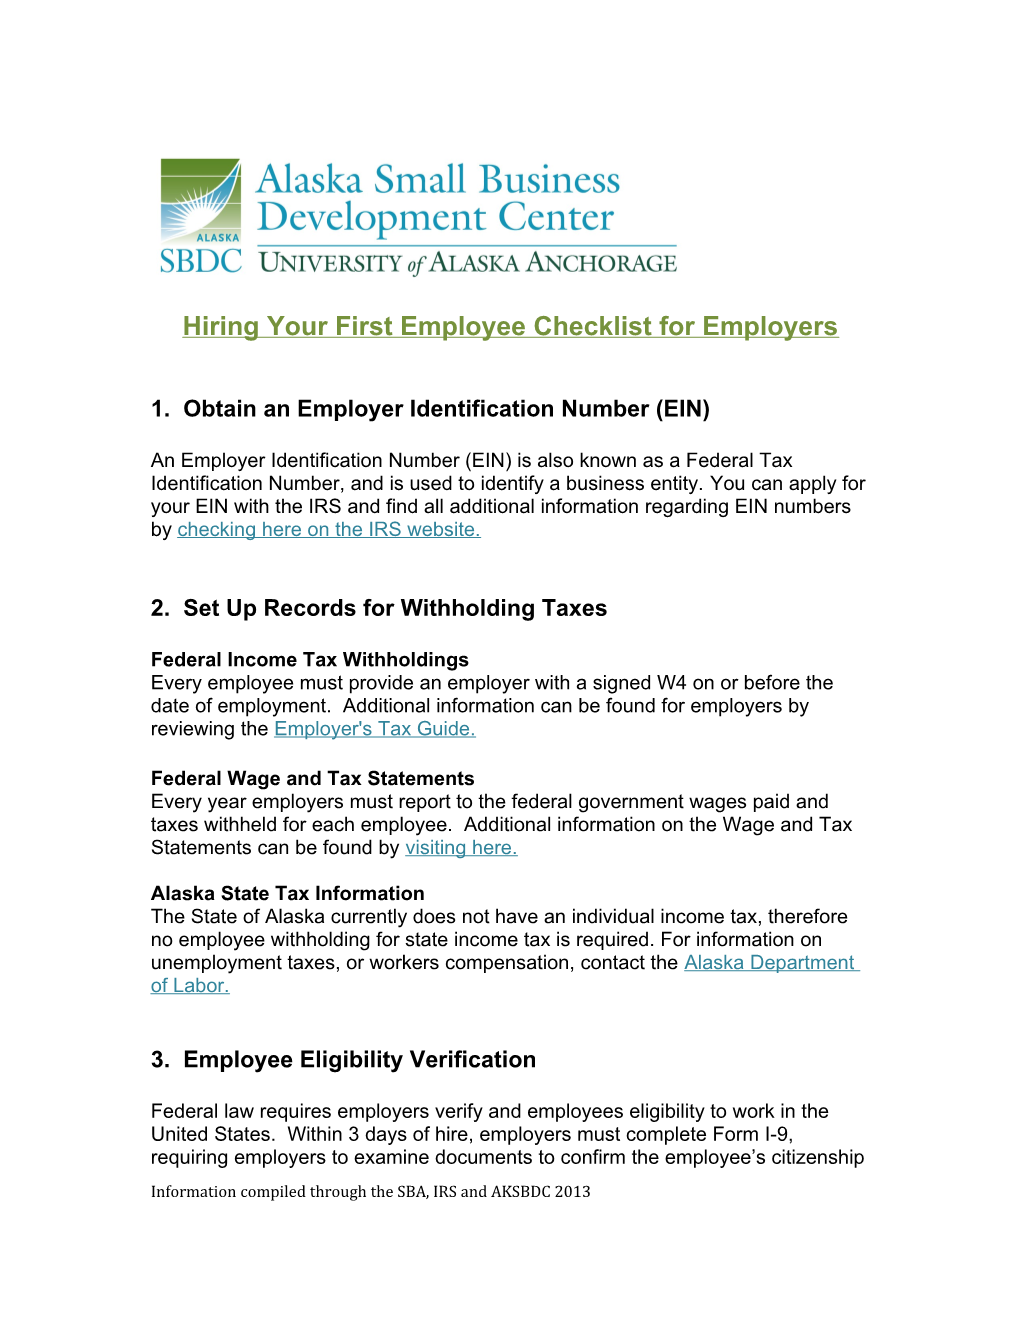 Hiring Your First Employee Checklist for Employers s1